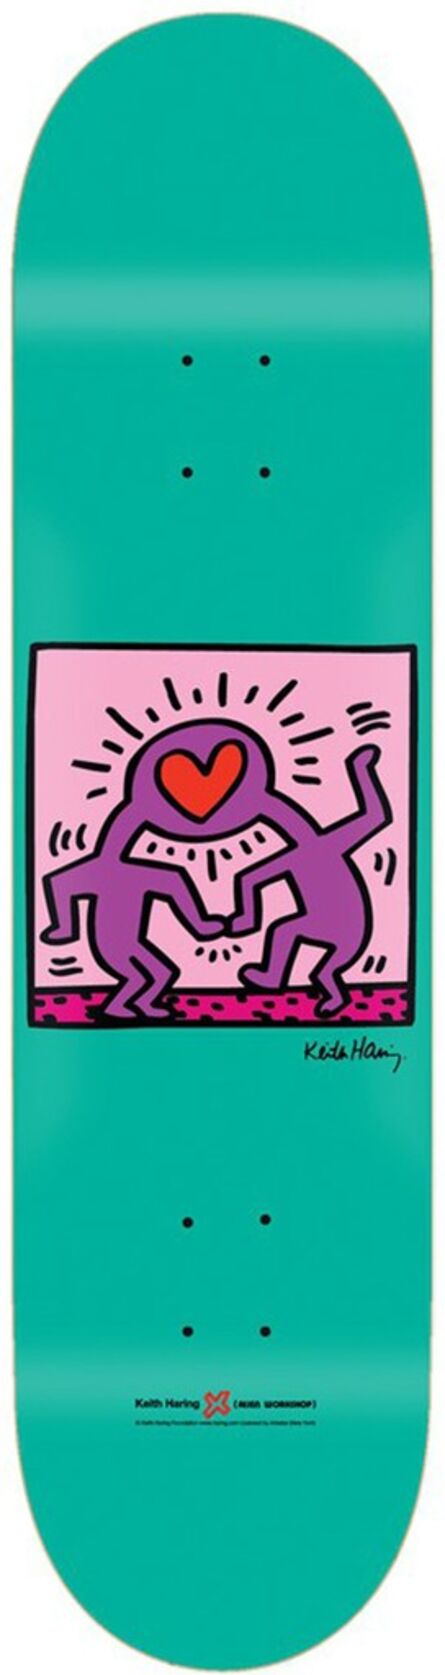 Keith Haring, ‘Untitled’, 2011